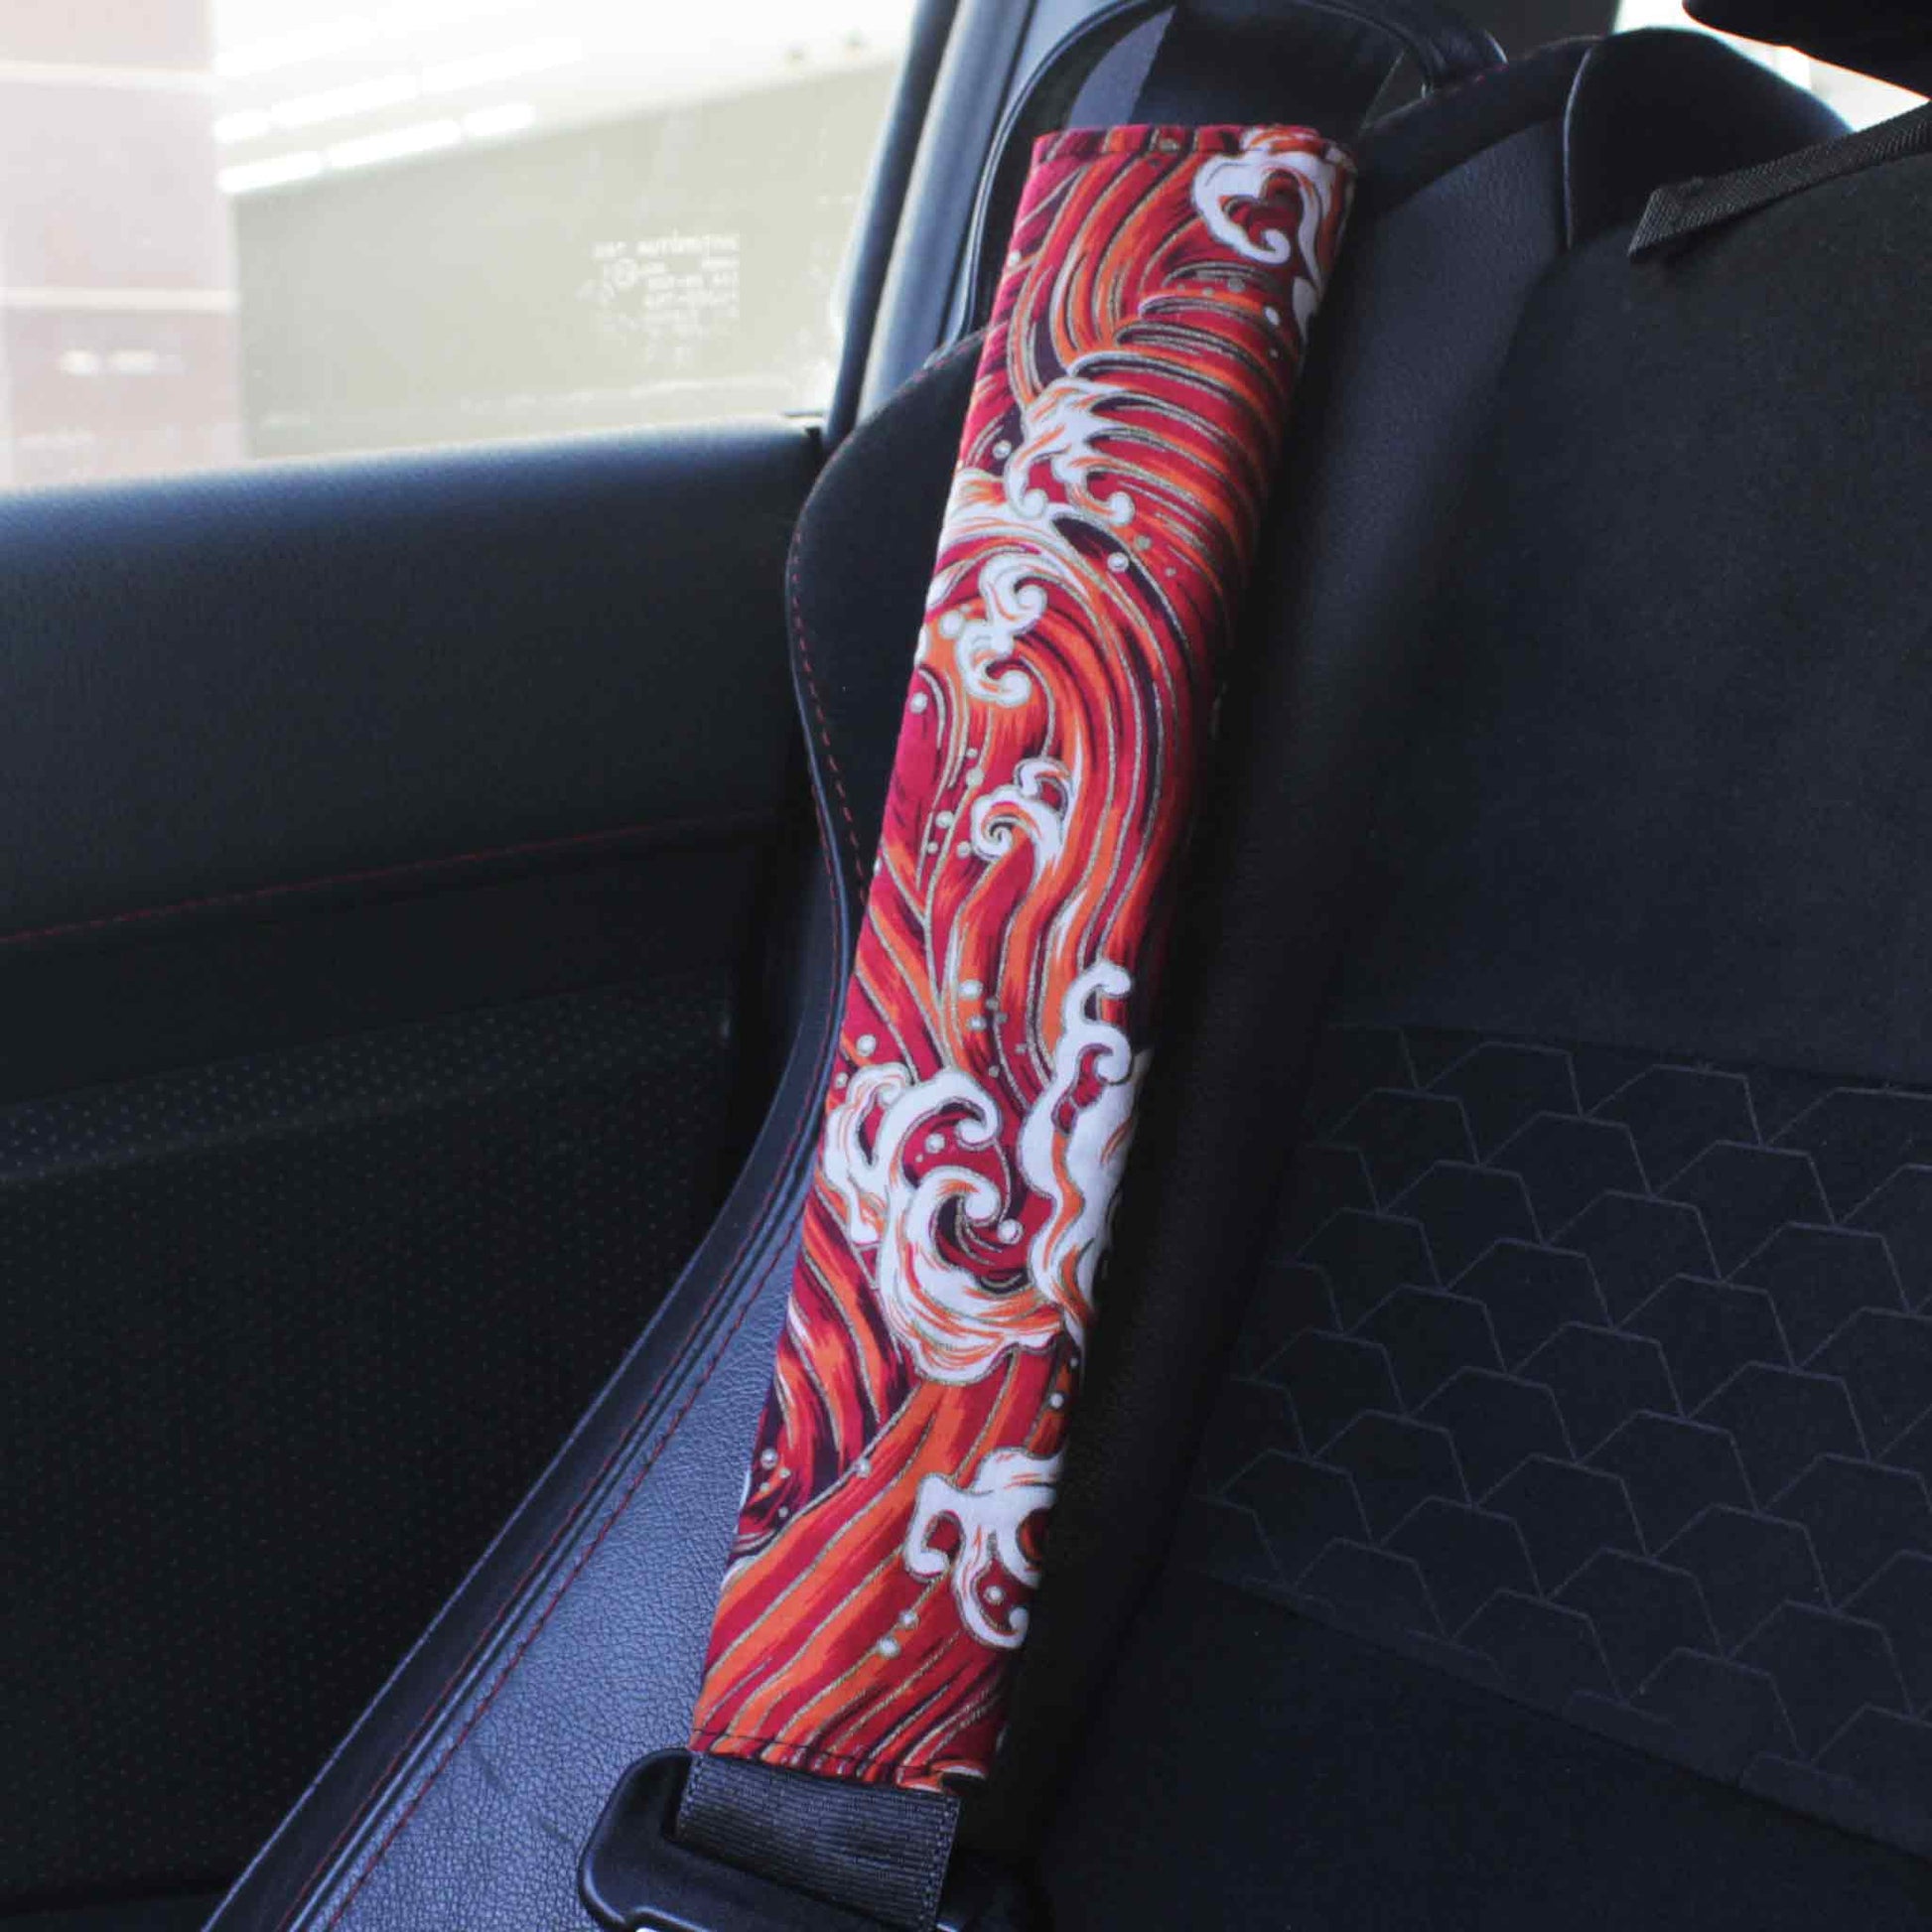 A seat belt cover with red great waves pattern installed on a Toyota 86's seat belt